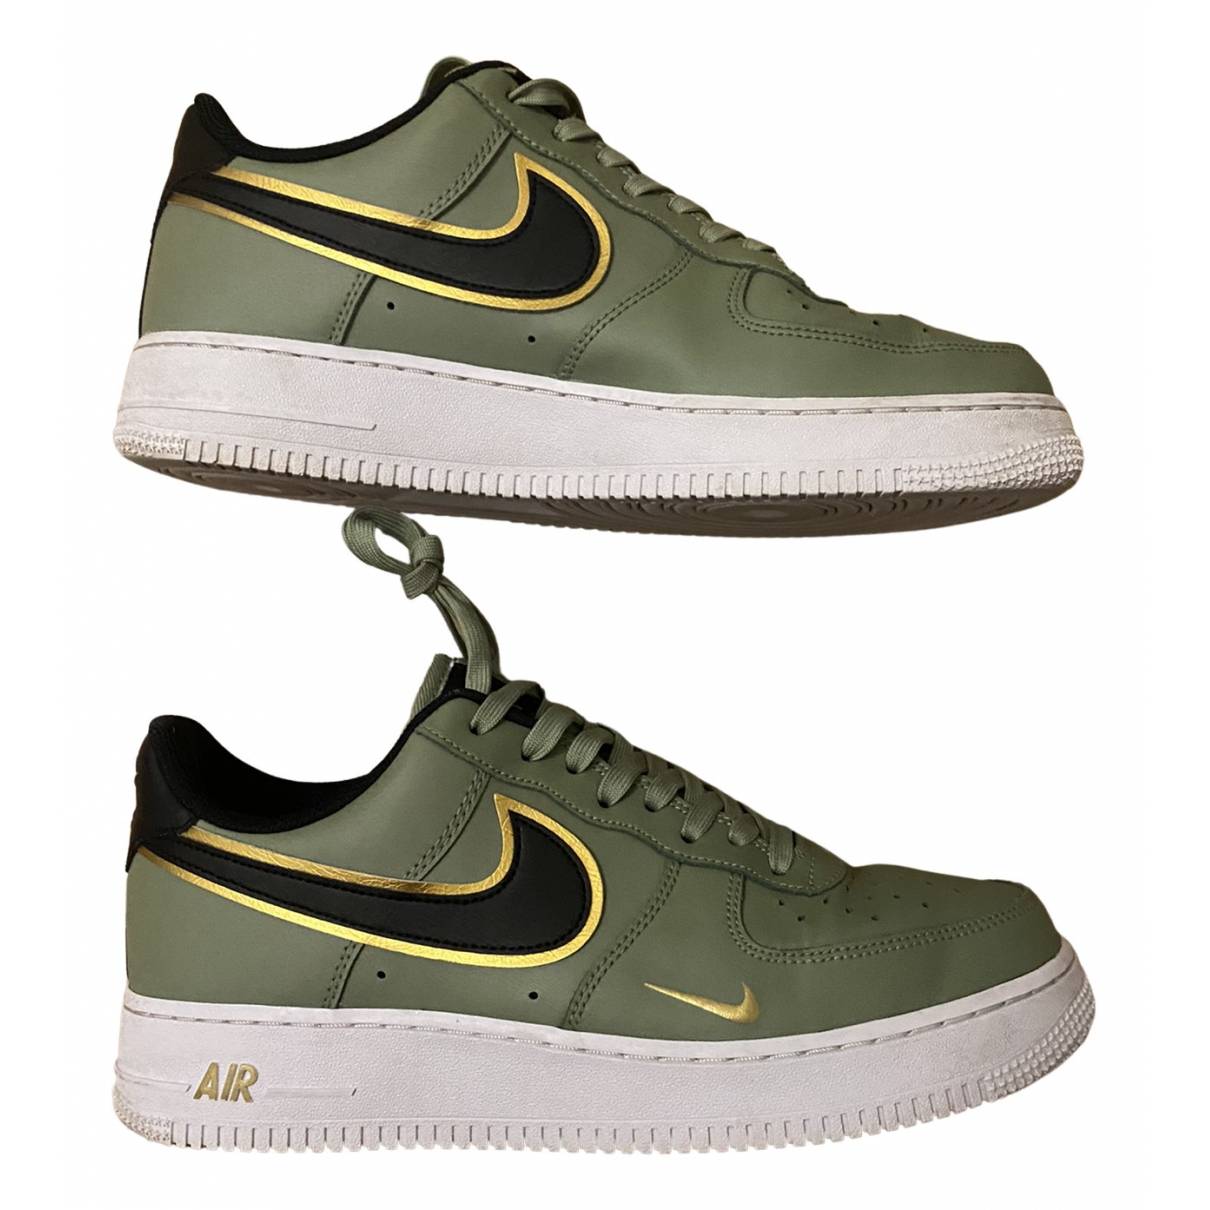 Air force 1 leather low trainers Nike Green size 42 EU in Leather - 24286616